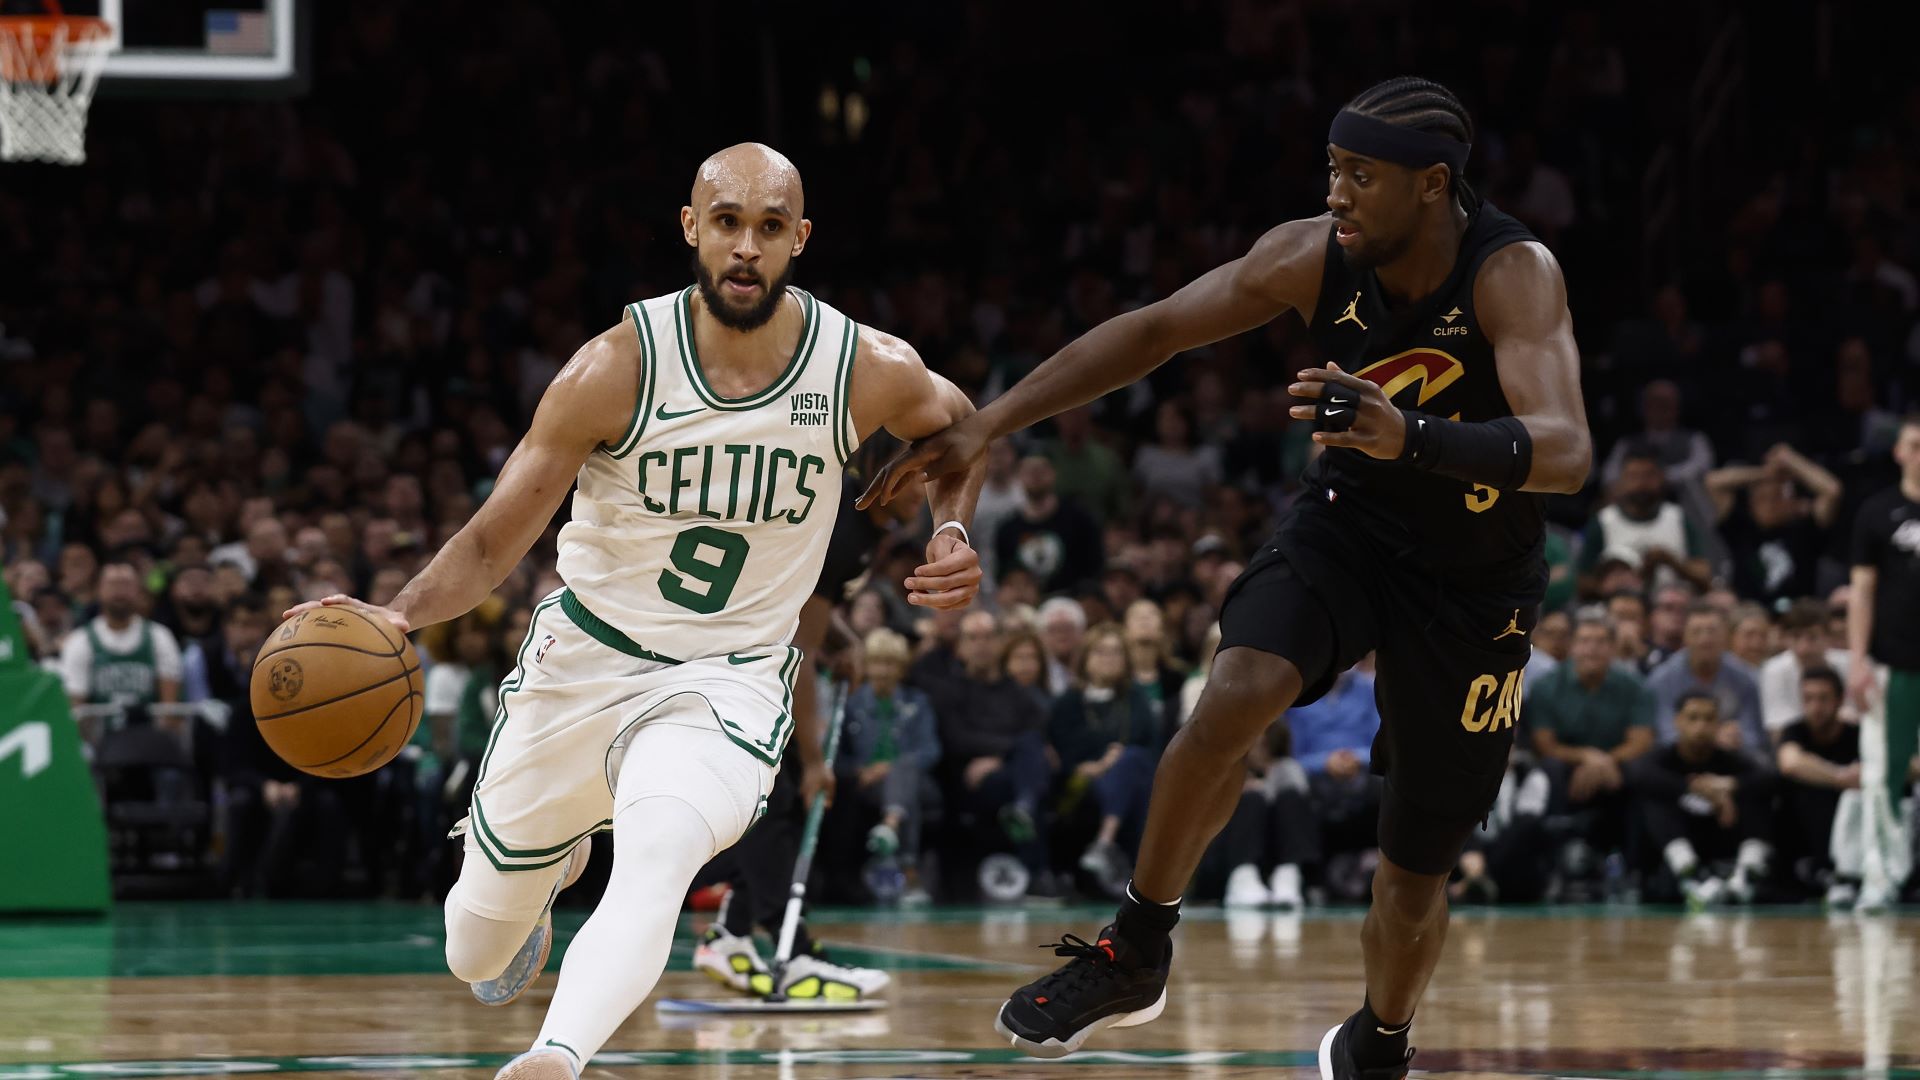 Cavaliers Star Praises Growth From Celtics’ Derrick White After Game
1